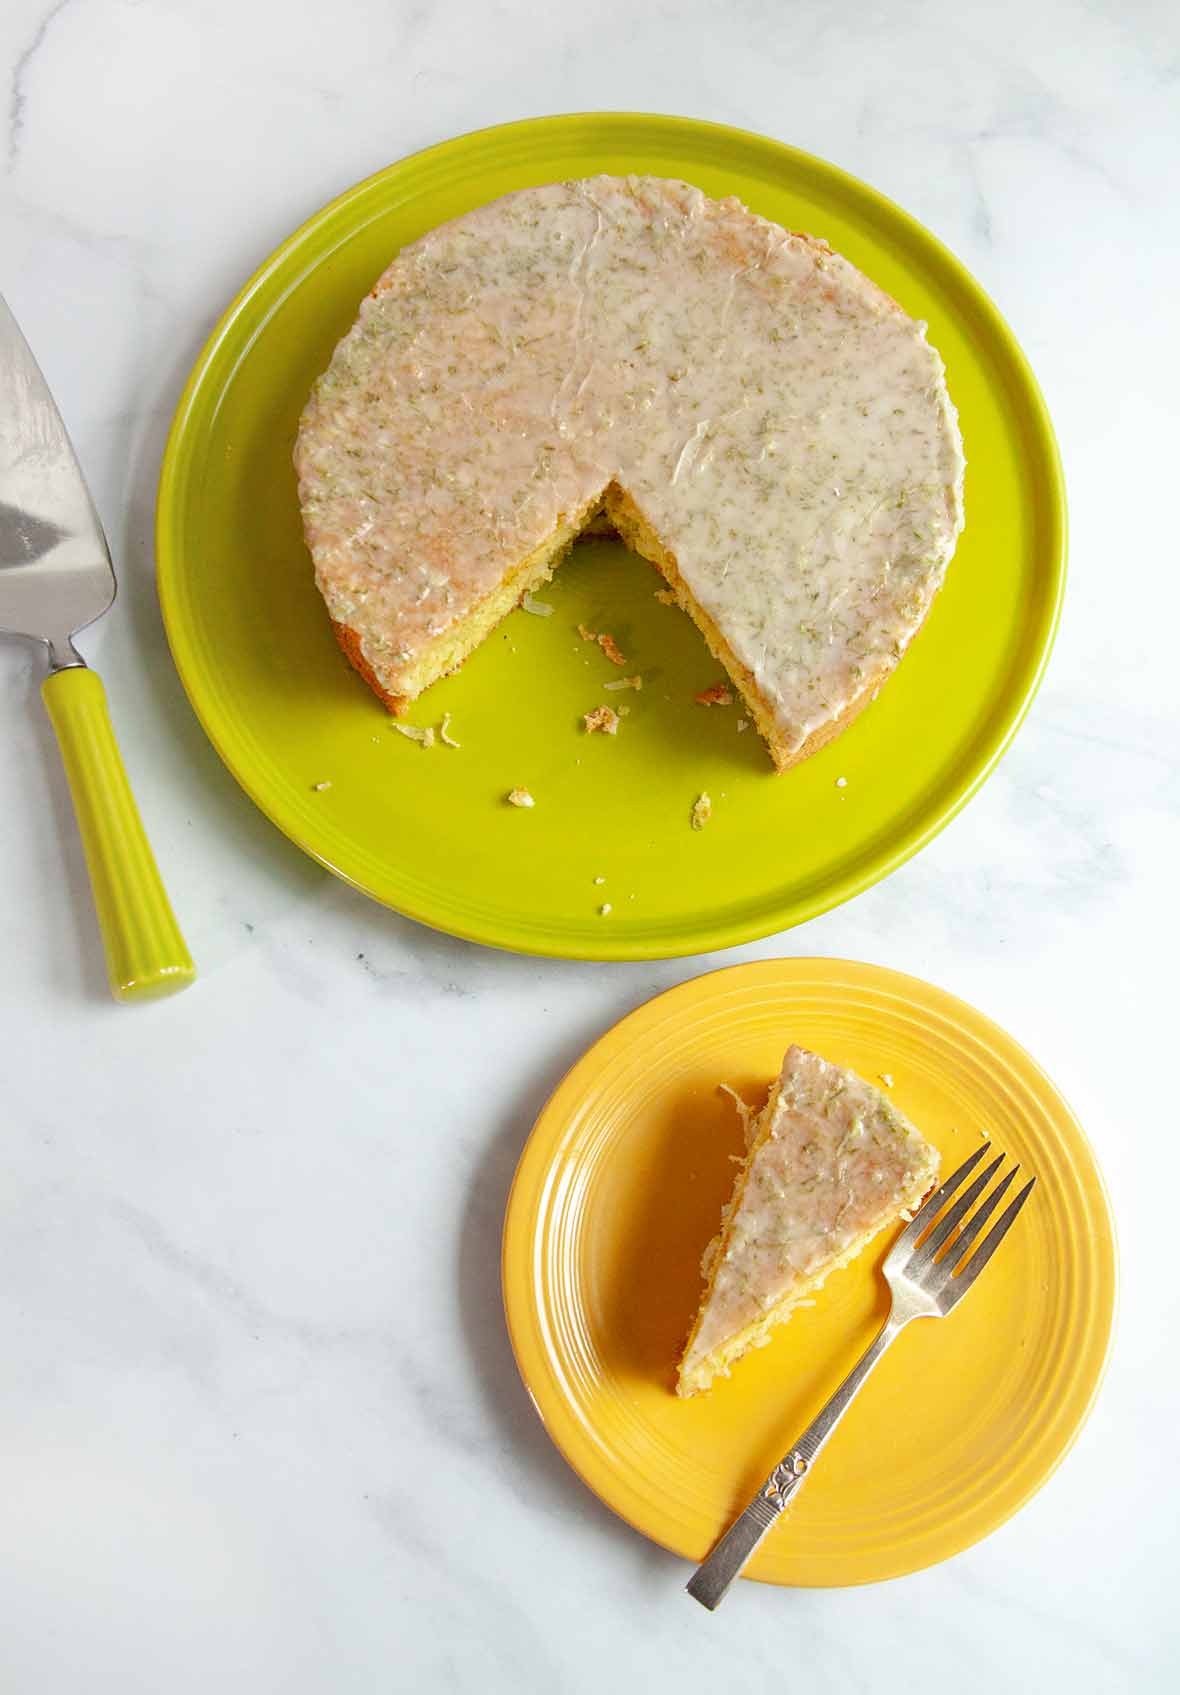 A coconut lime macadamia cake on a green platter with one slice cut out and placed on a yellow plate